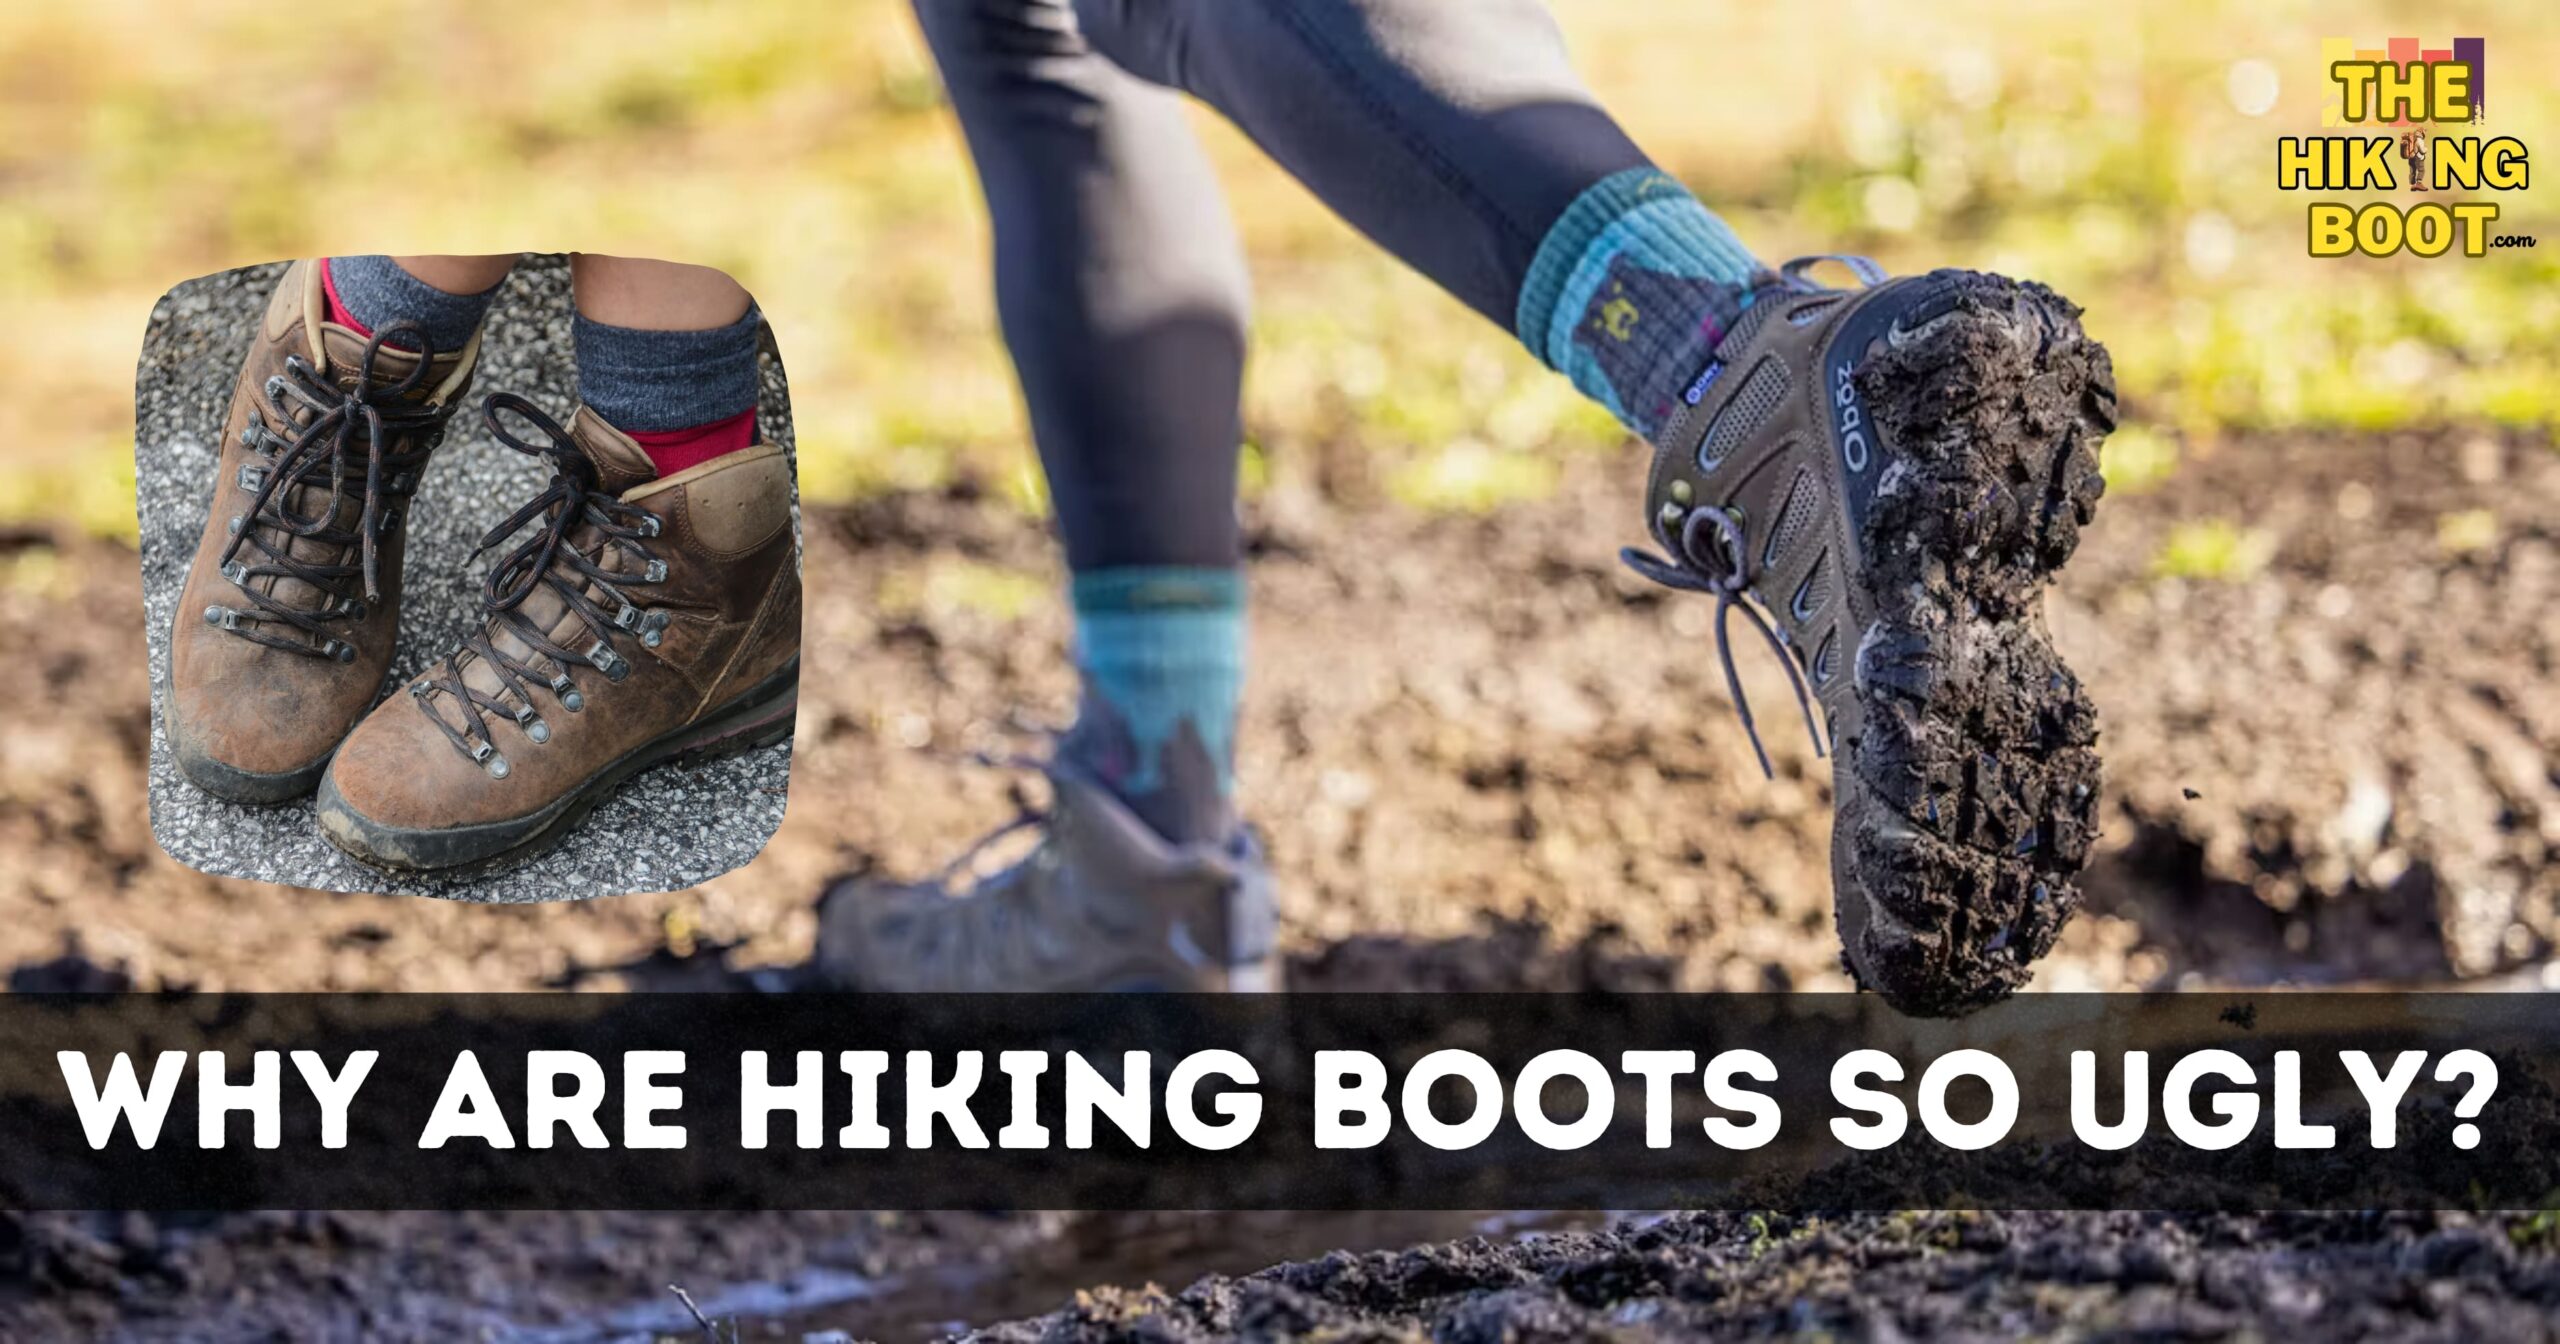 Why Are Hiking Boots So Ugly? 13 Reasons to Consider